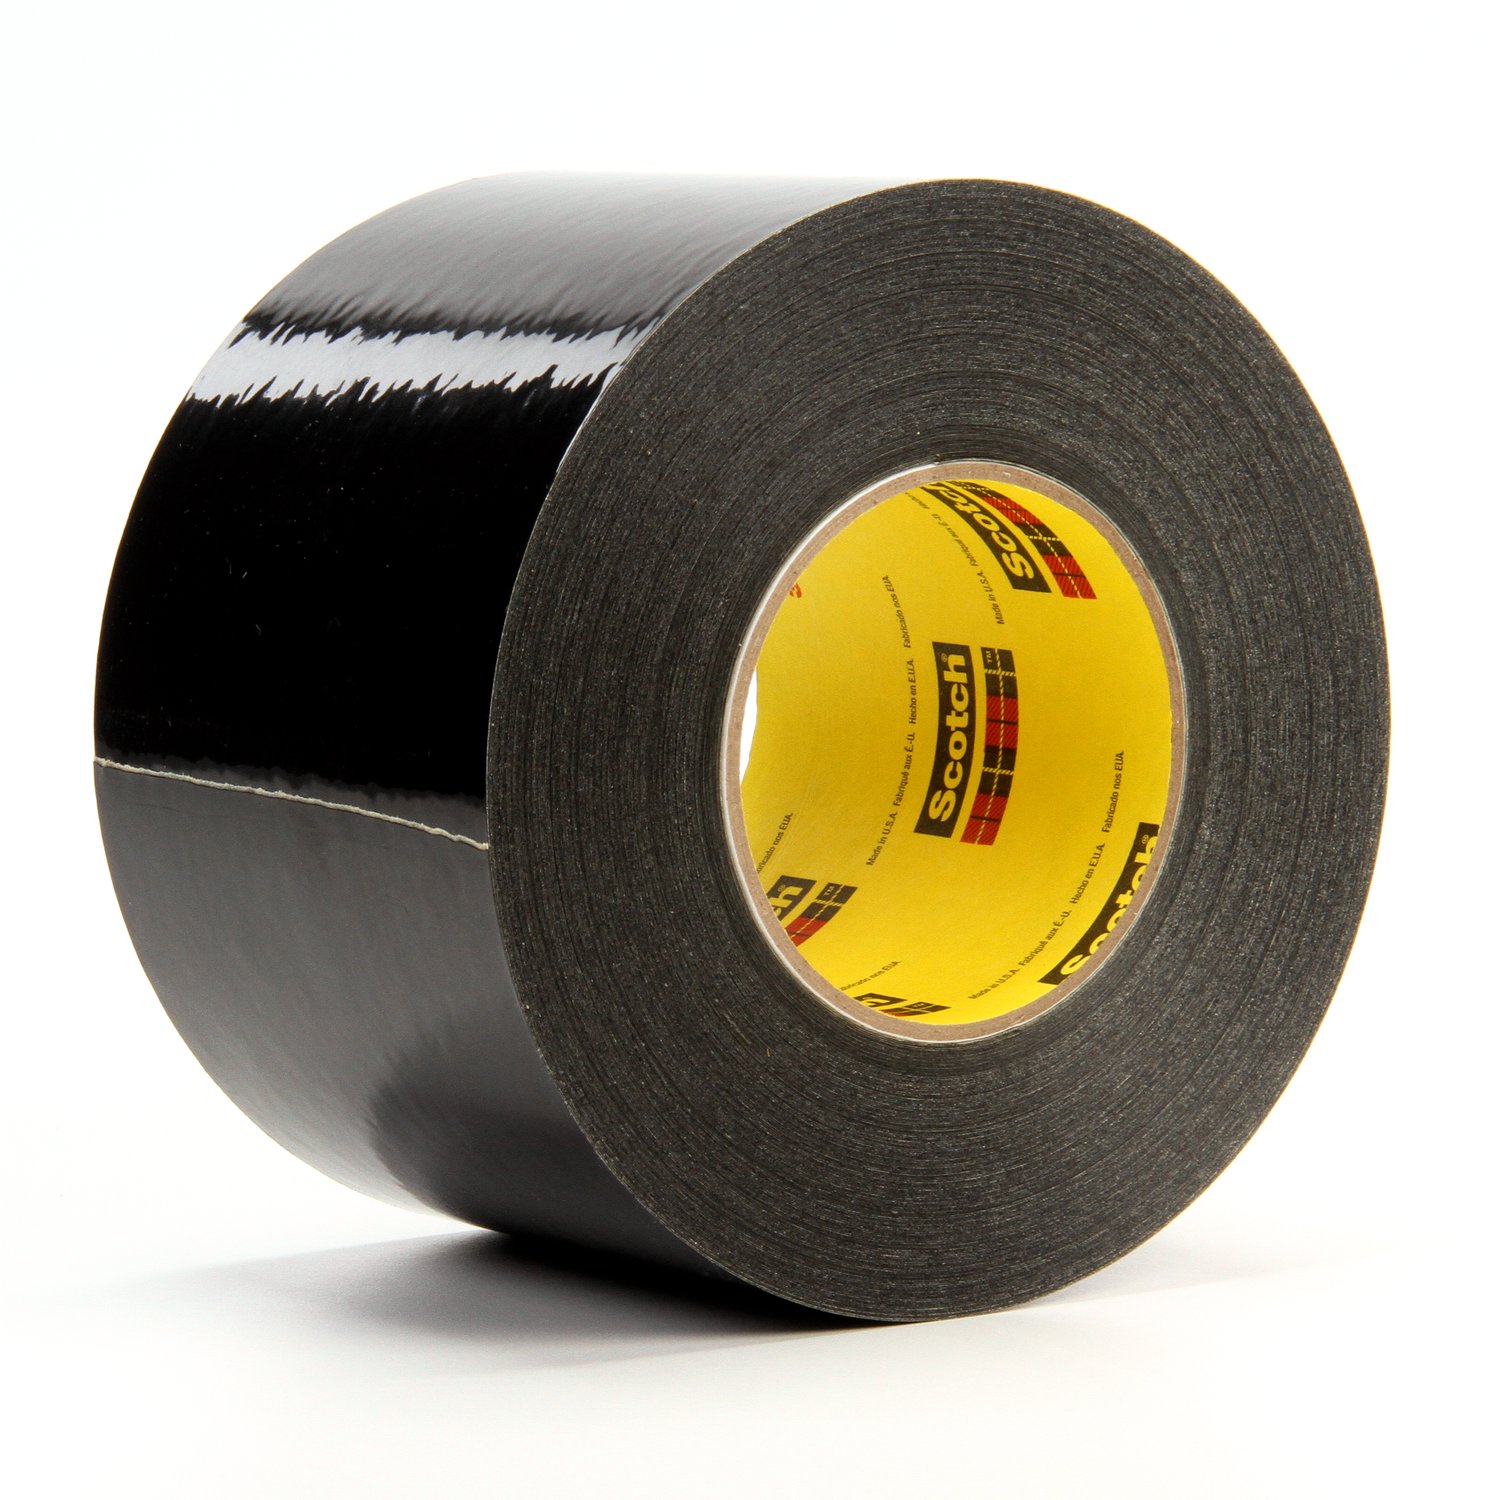 7000123577 - Scotch Solvent Resistant Masking Tape 226, Black, 4 in x 60 yd, 10.6
mil, 8/Case